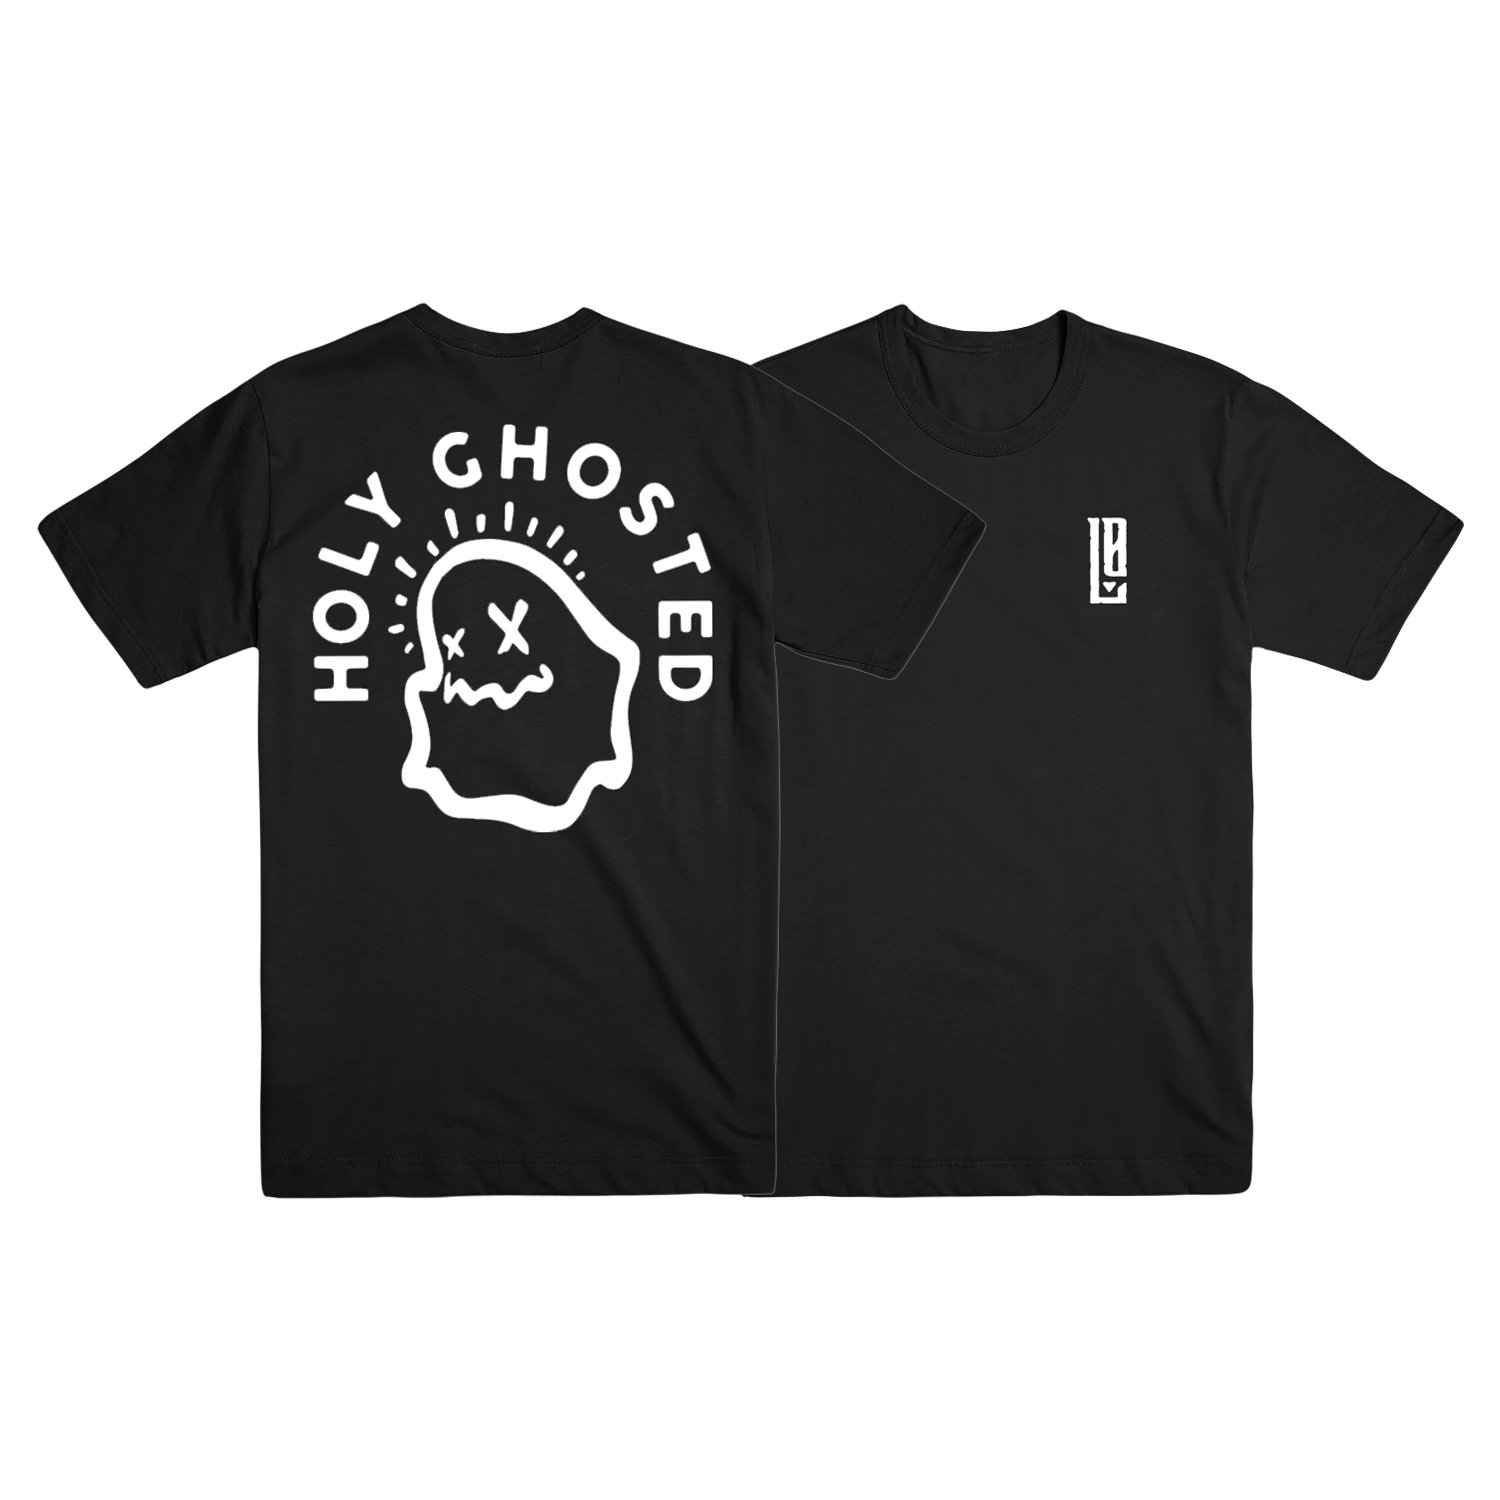 Holy Ghosted Tee